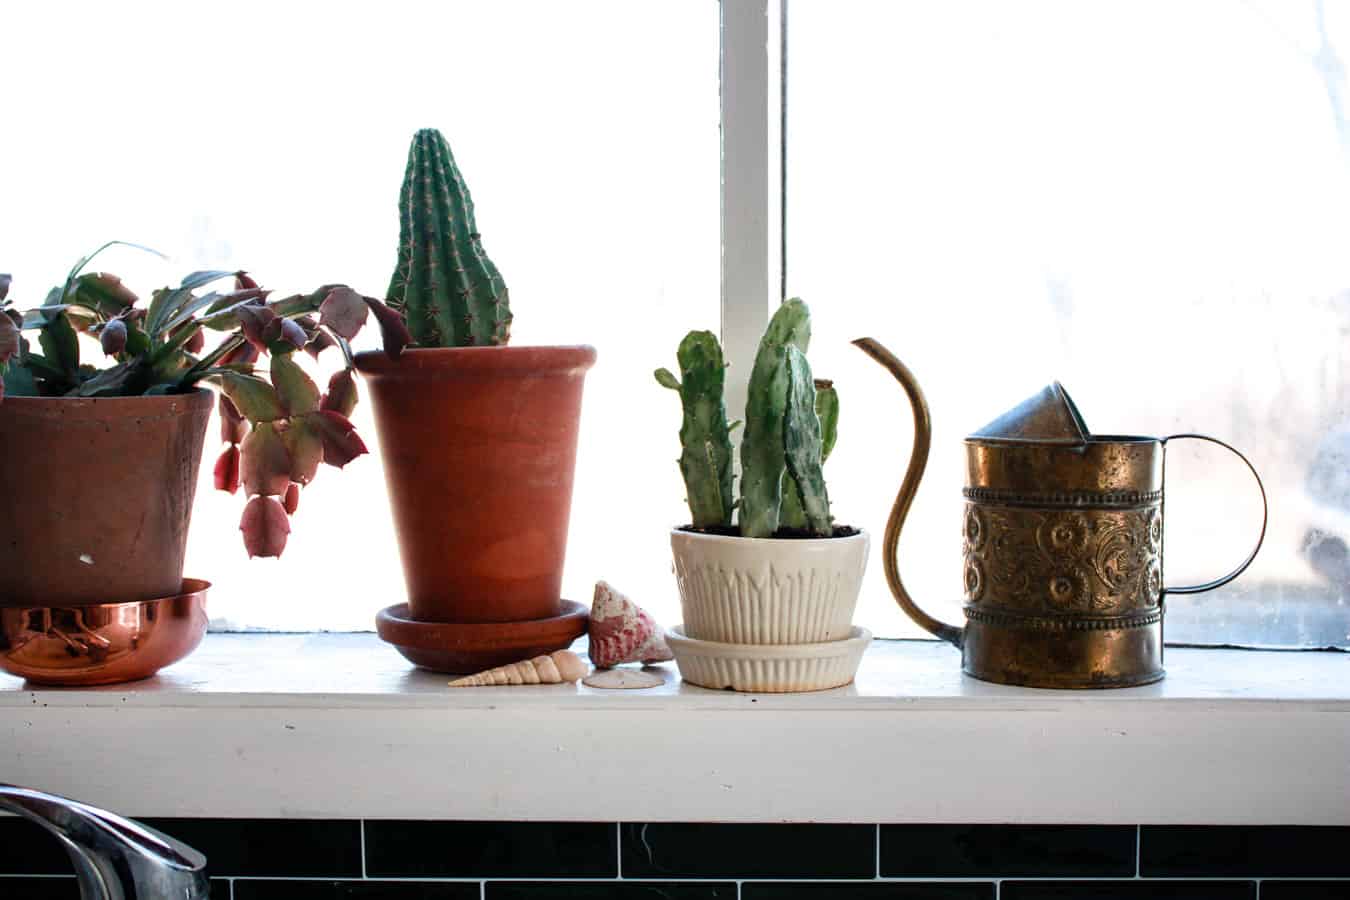 three potted cactus plants with vintage watering can and sea shells on kitchen window sill